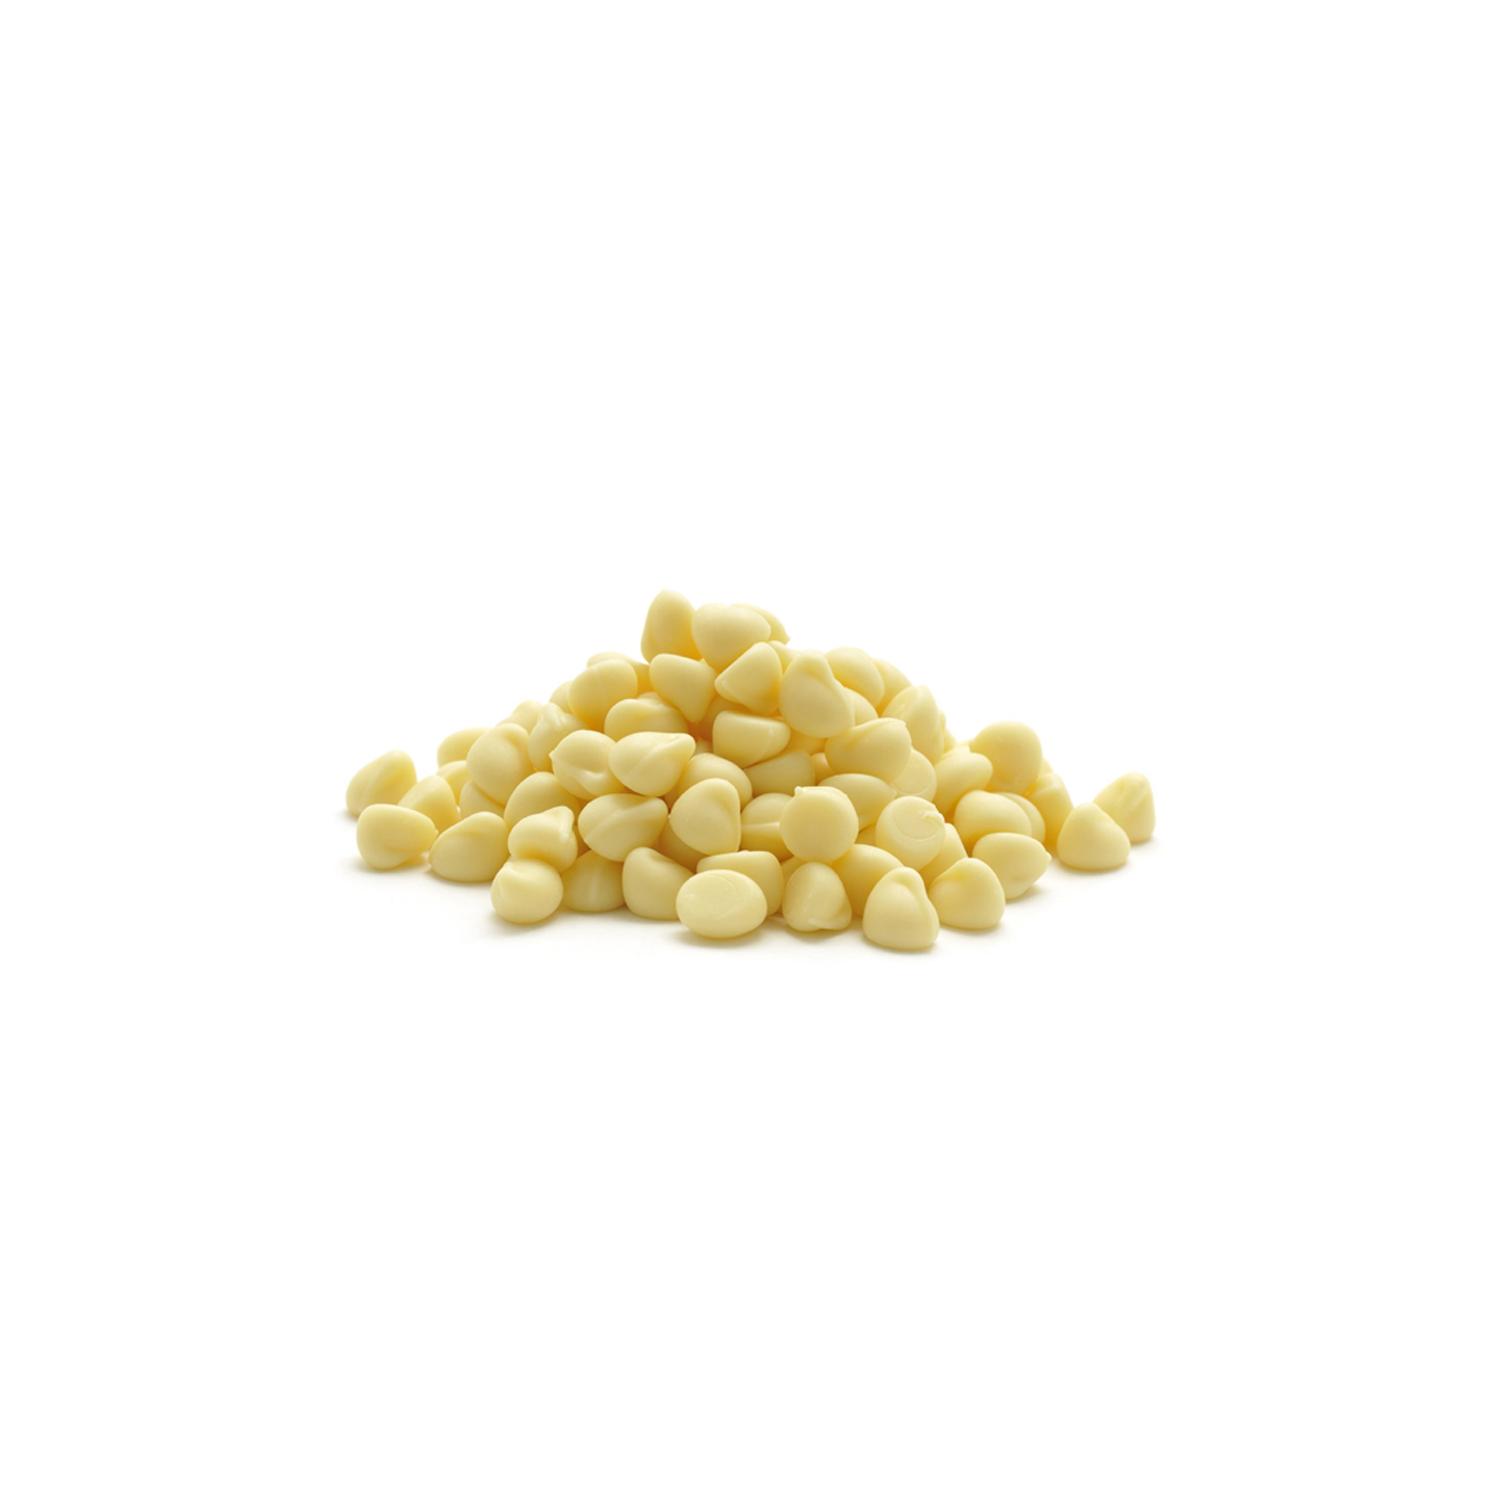 AALST WHITE CHOCOLATE CHIPS 12KG